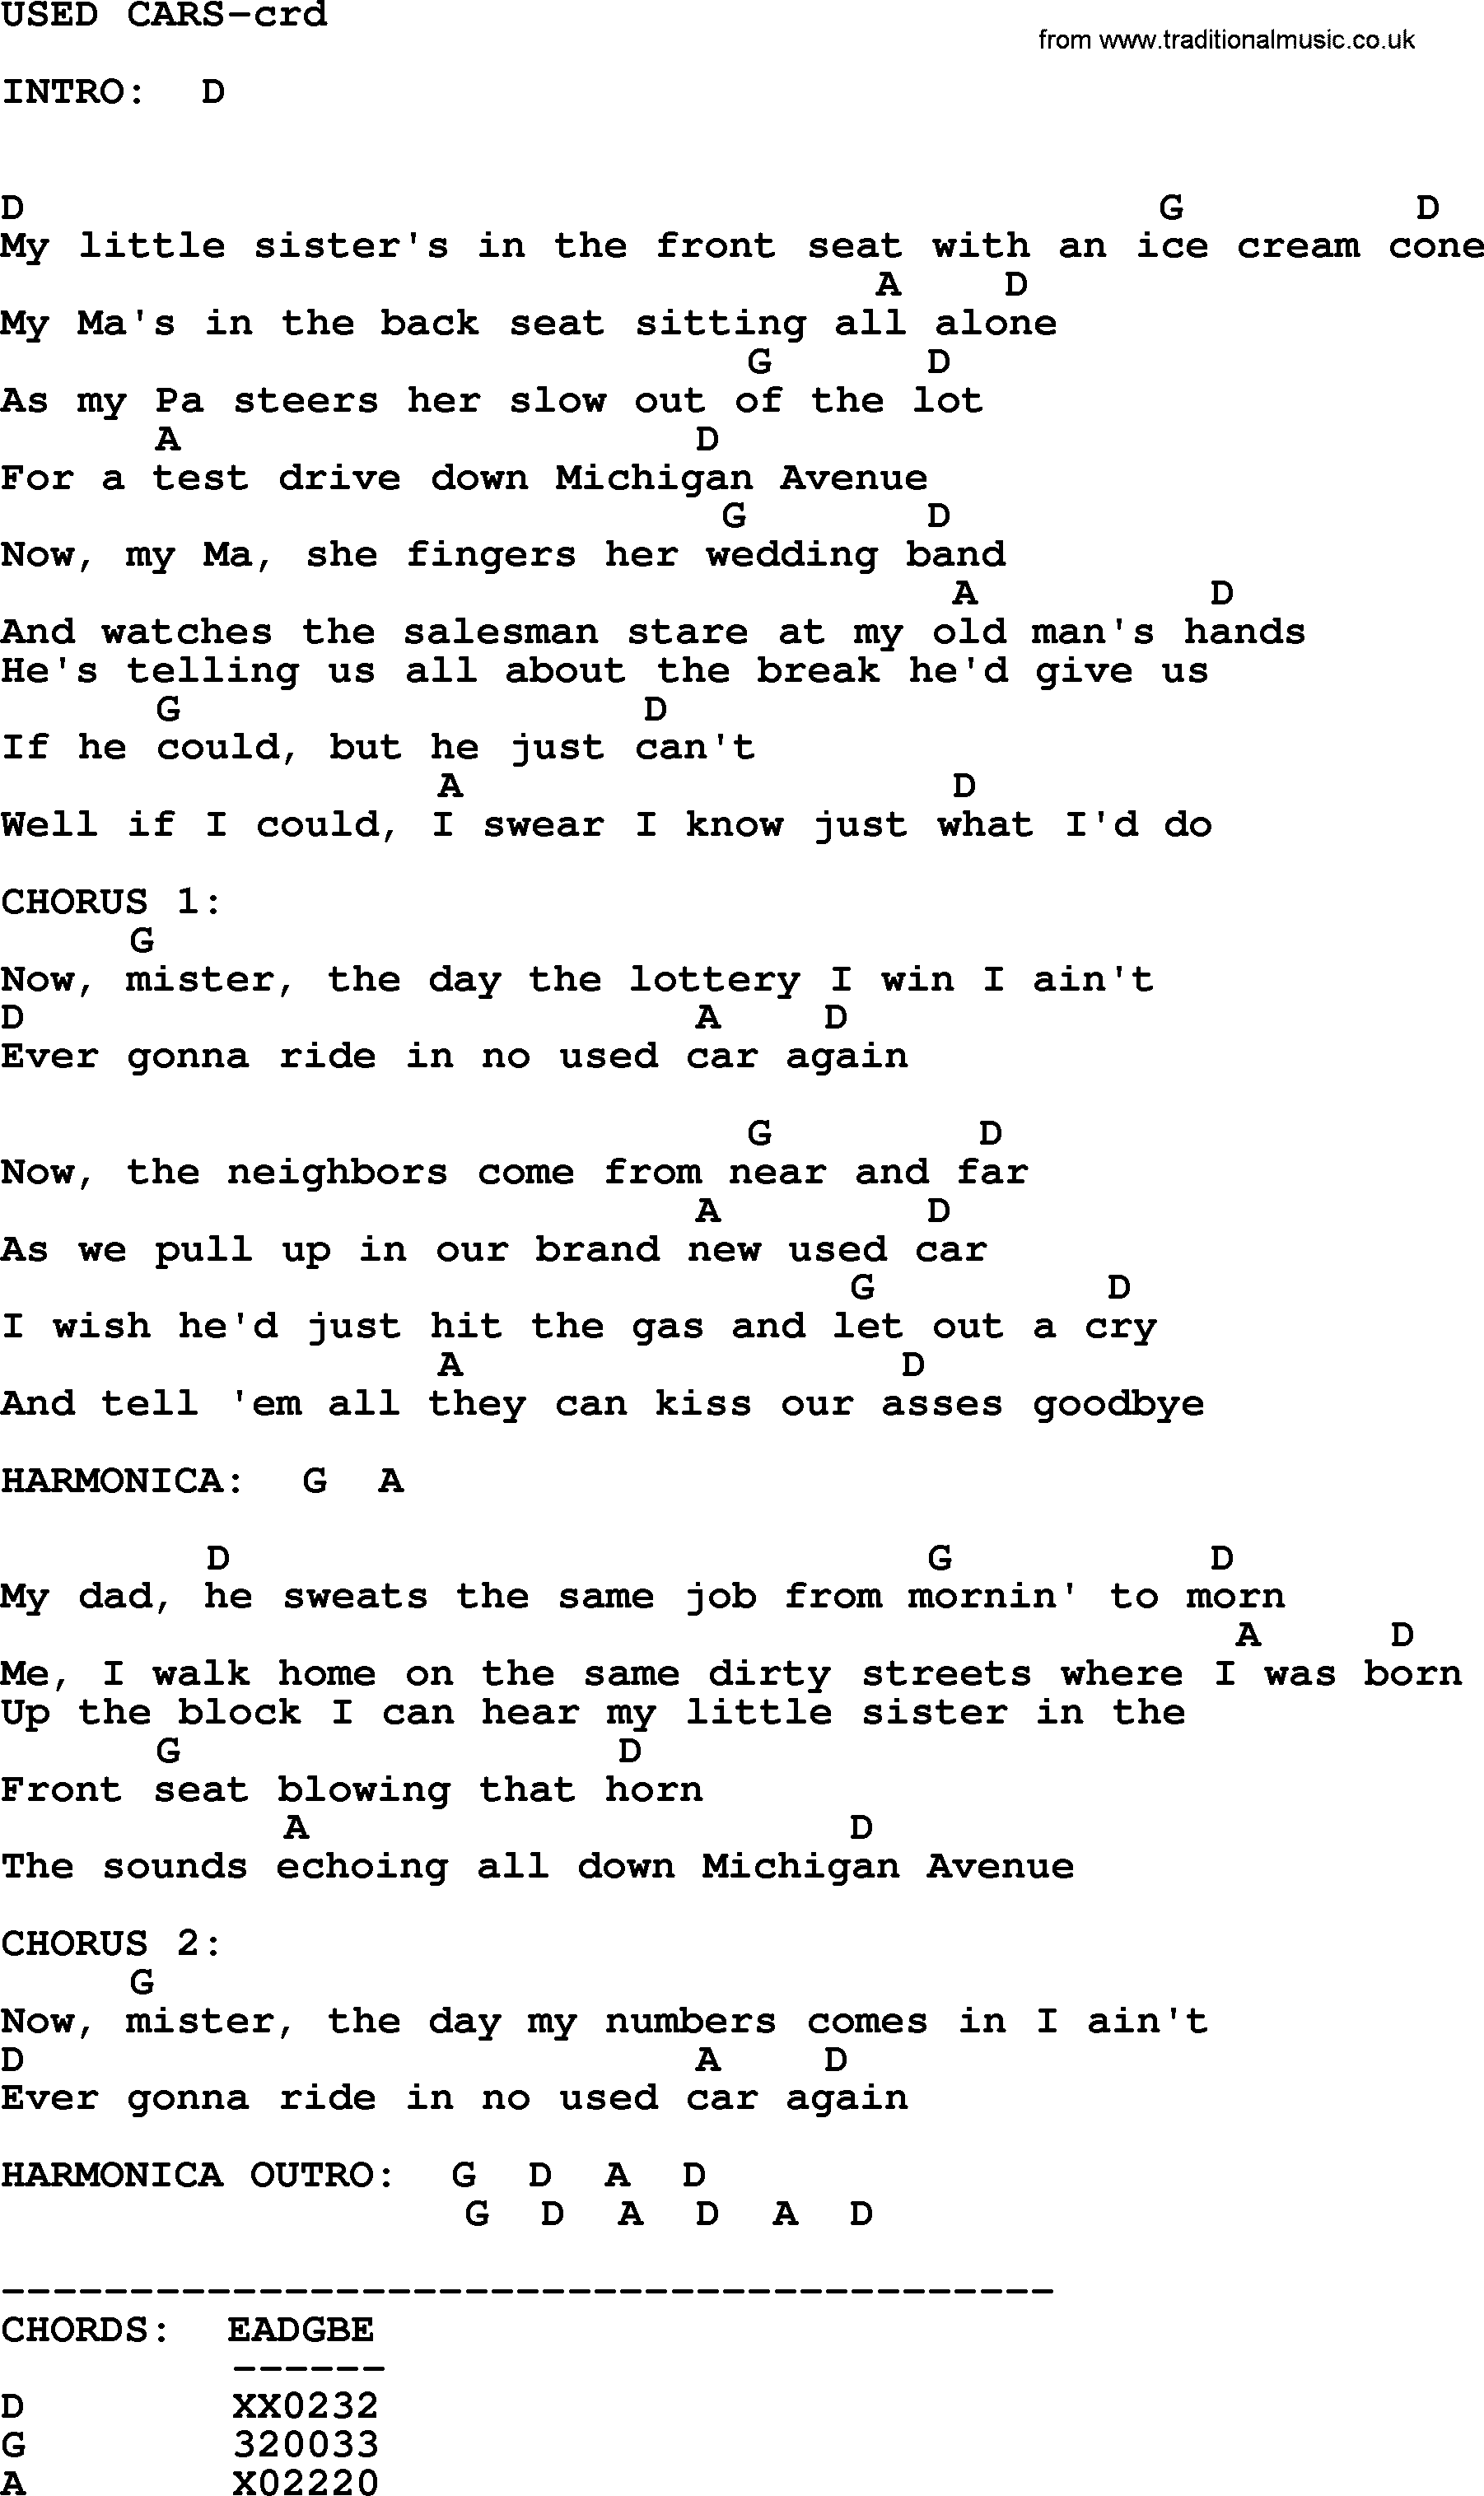 Bruce Springsteen song: Used Cars, lyrics and chords